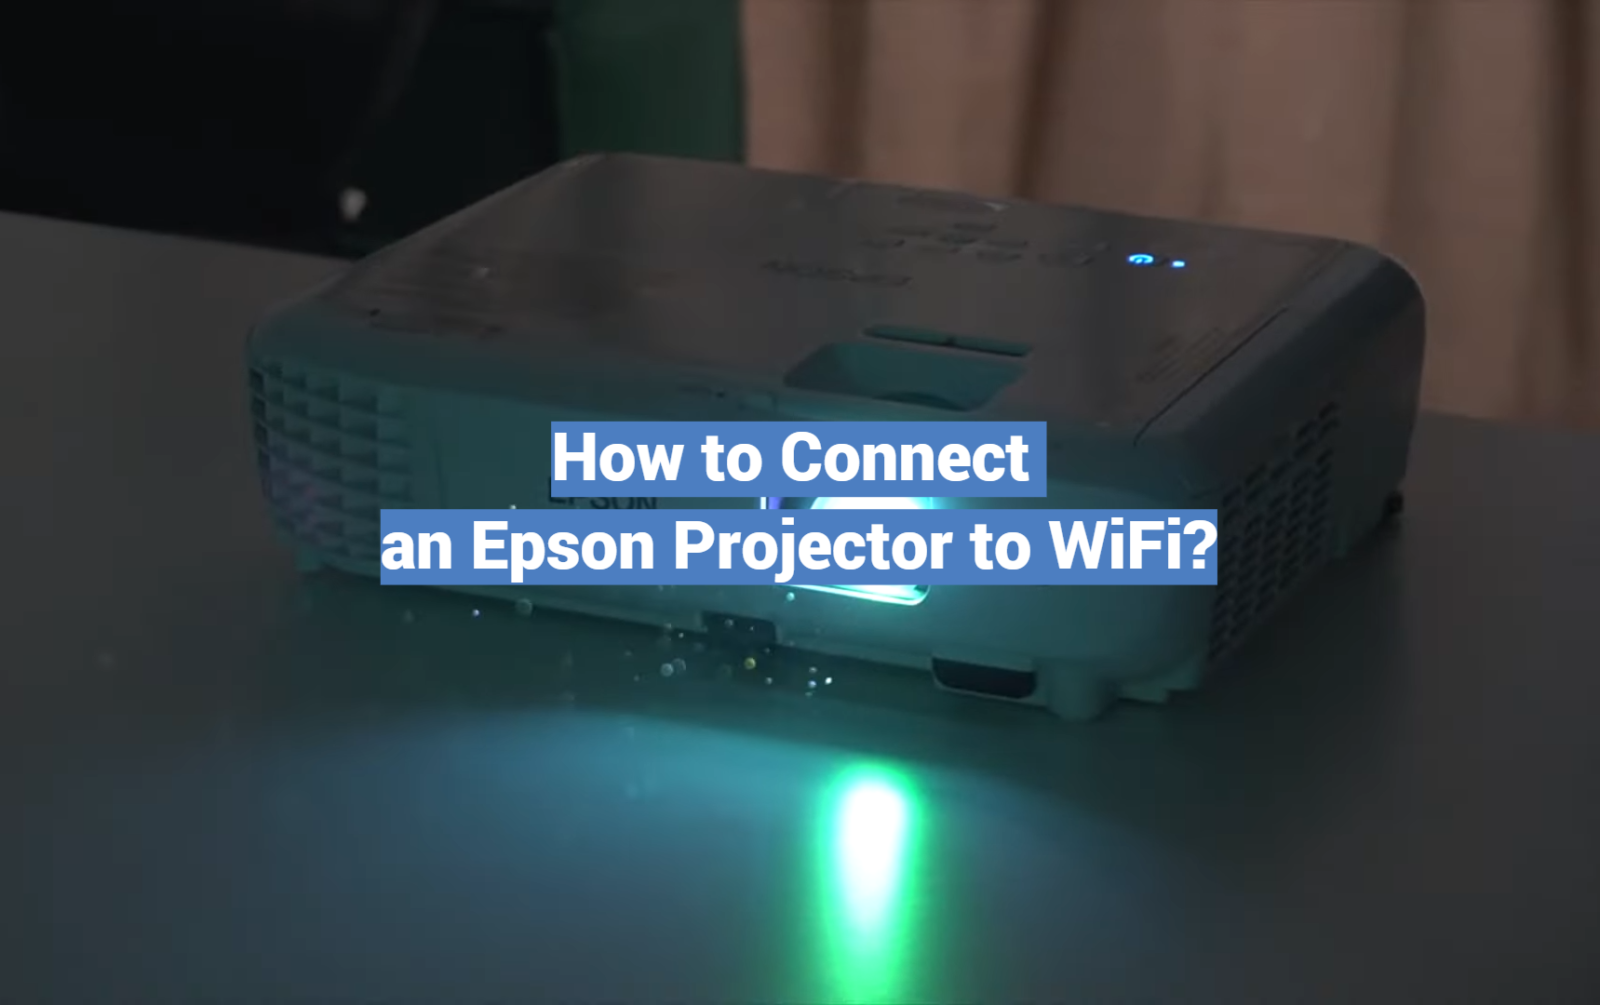 How to Connect an Epson Projector to WiFi?